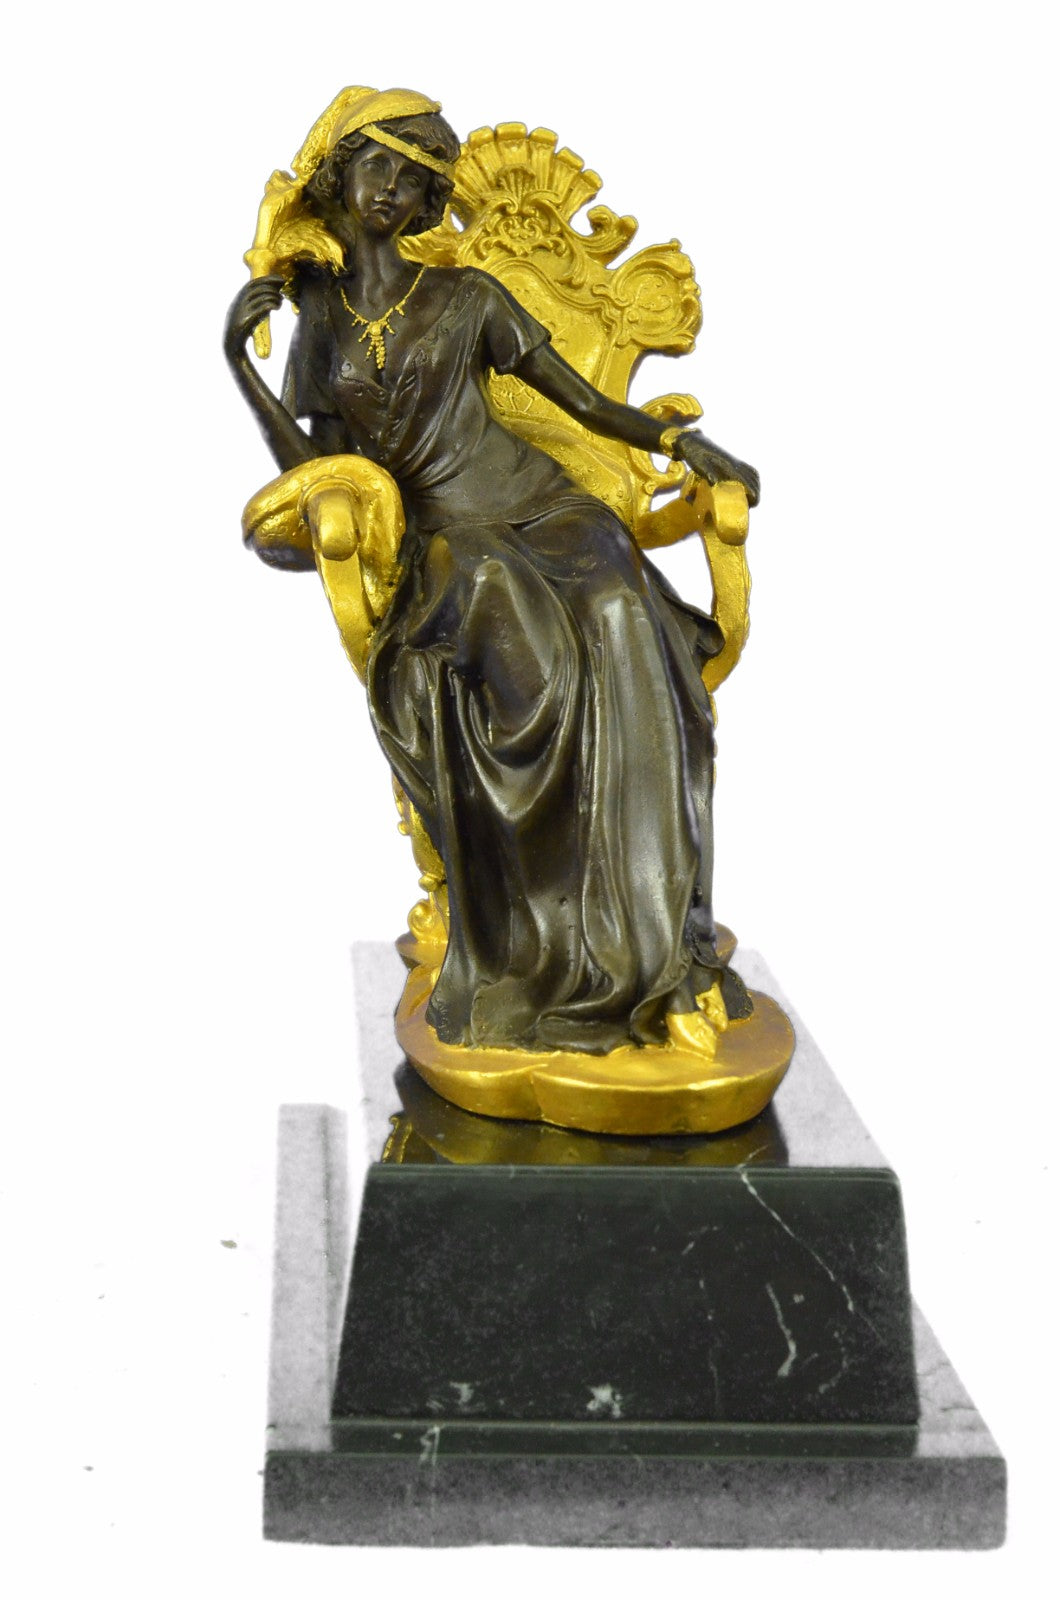 Handcrafted Art Nouveau Sexy woman Sitting on a Chair Bronze Sculpture Figurine